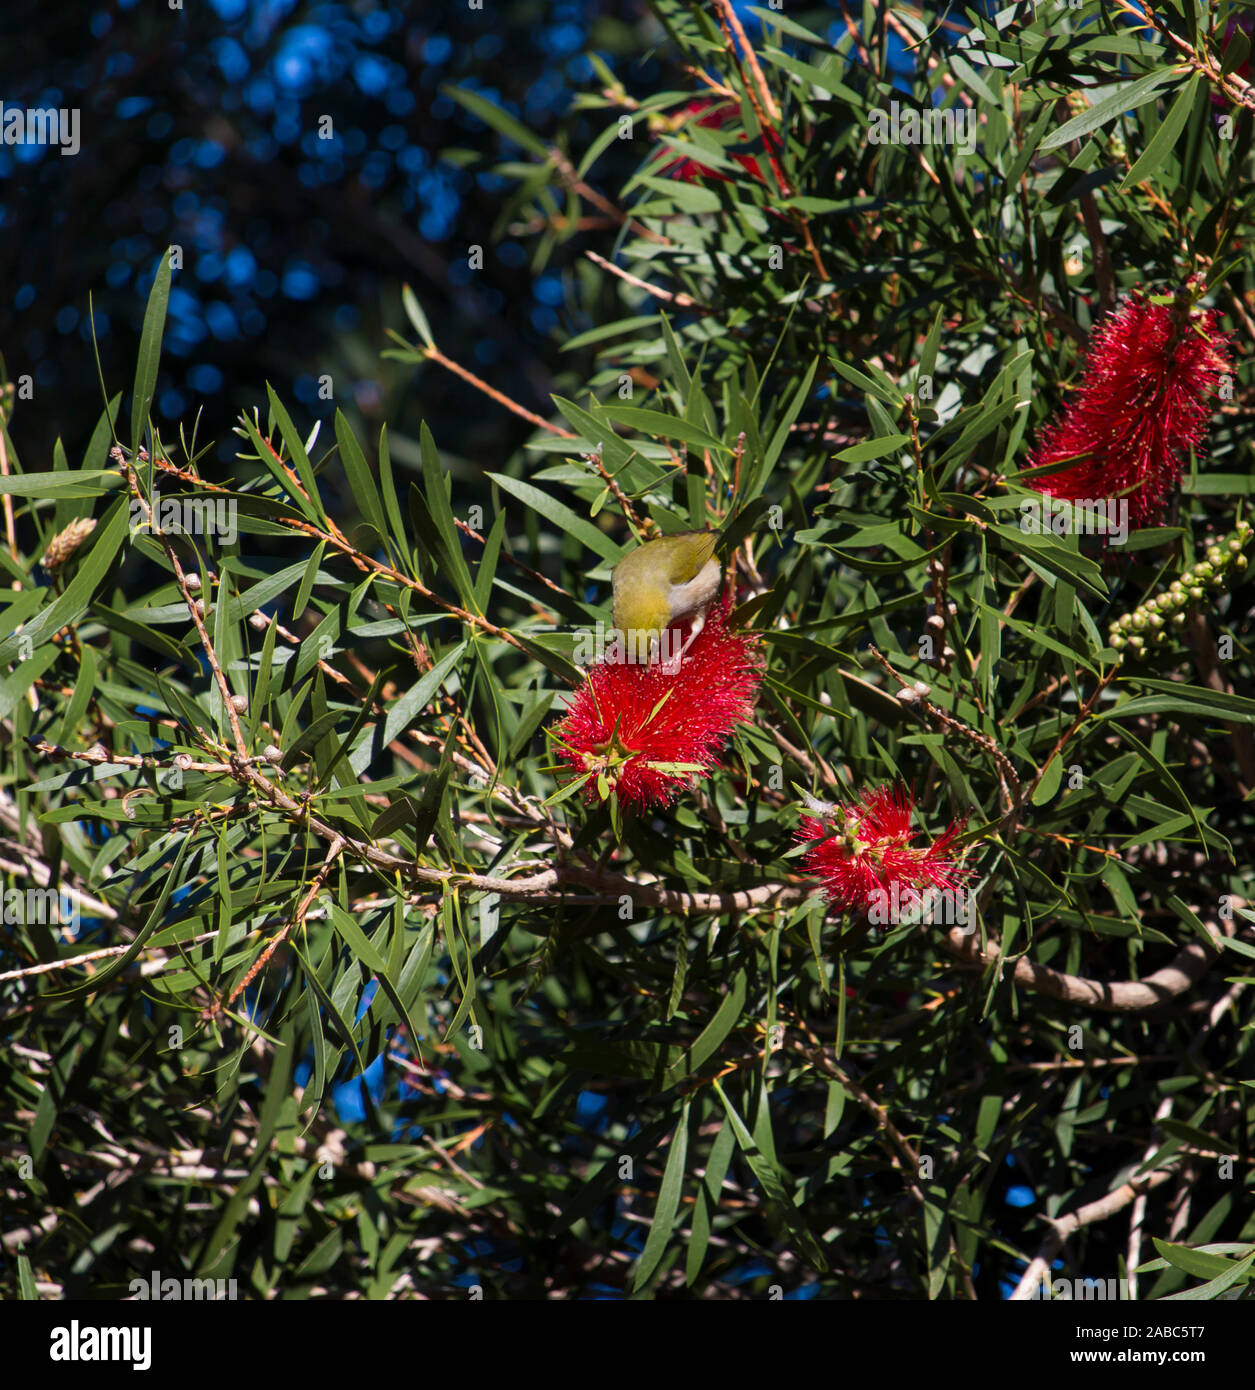 A dainty small  Australian brown Honeyeater family Meliphagidae  a bird native to Australia is  perched in a red callistemon shrub sipping nectar. Stock Photo